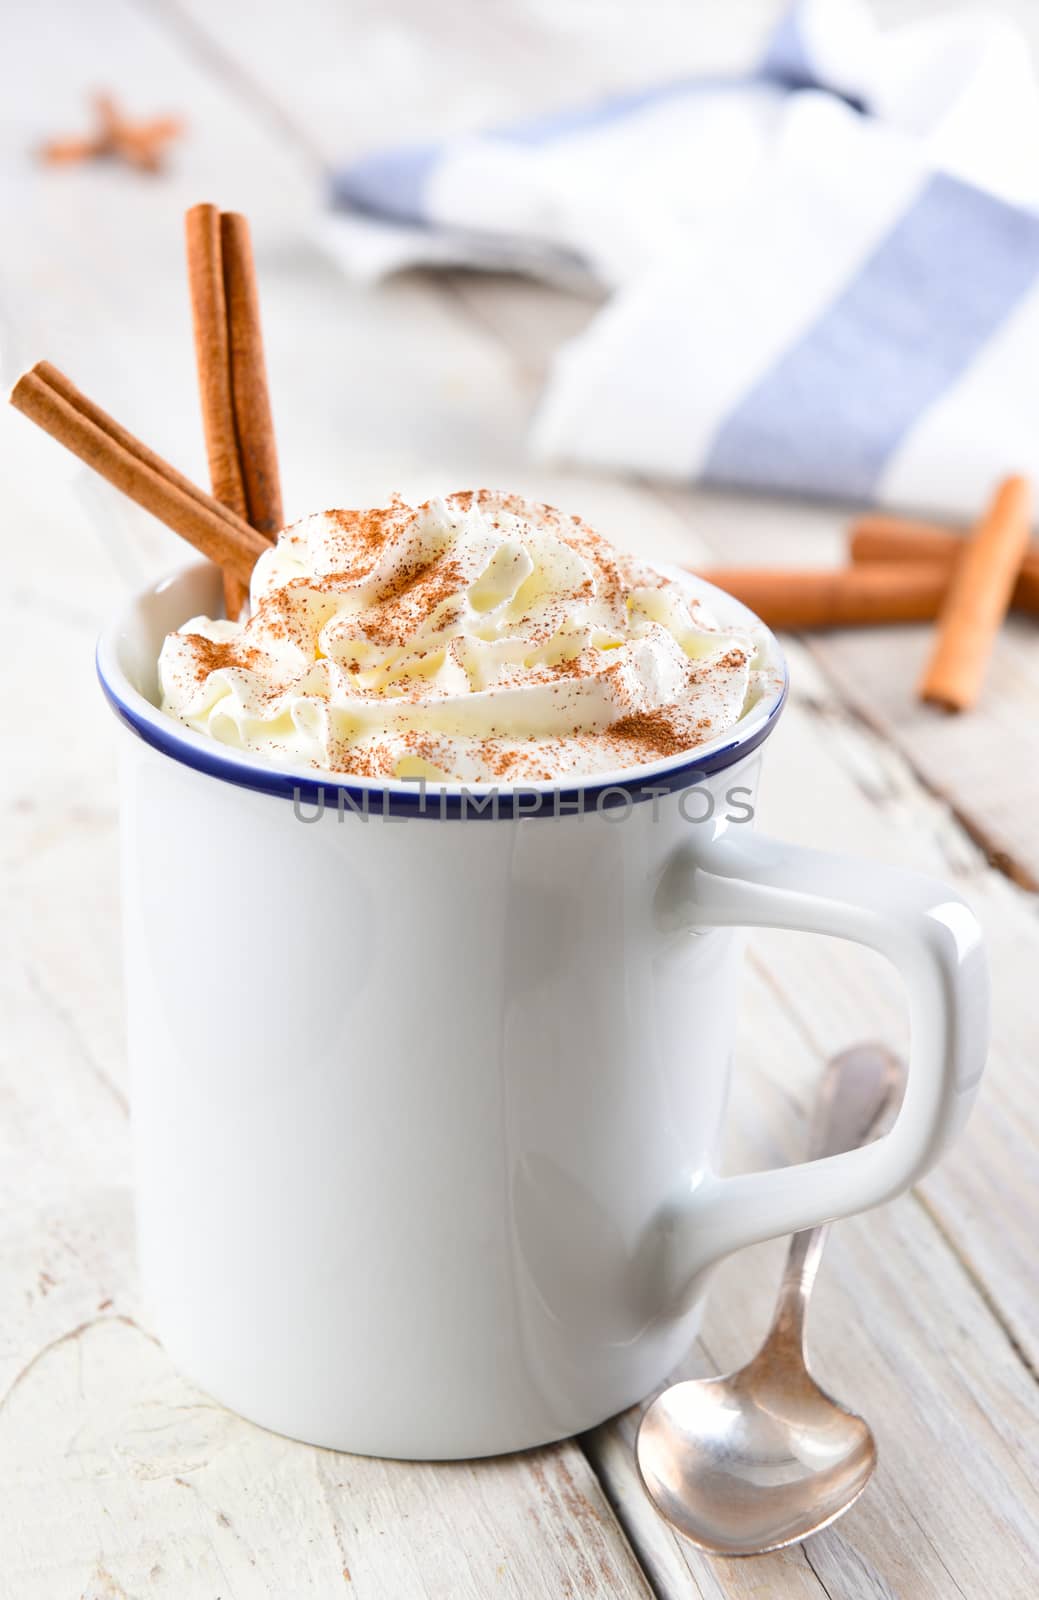 Hot Cocoa in white mug with cinnamon sticks. Vertical format with shallow depth of field.